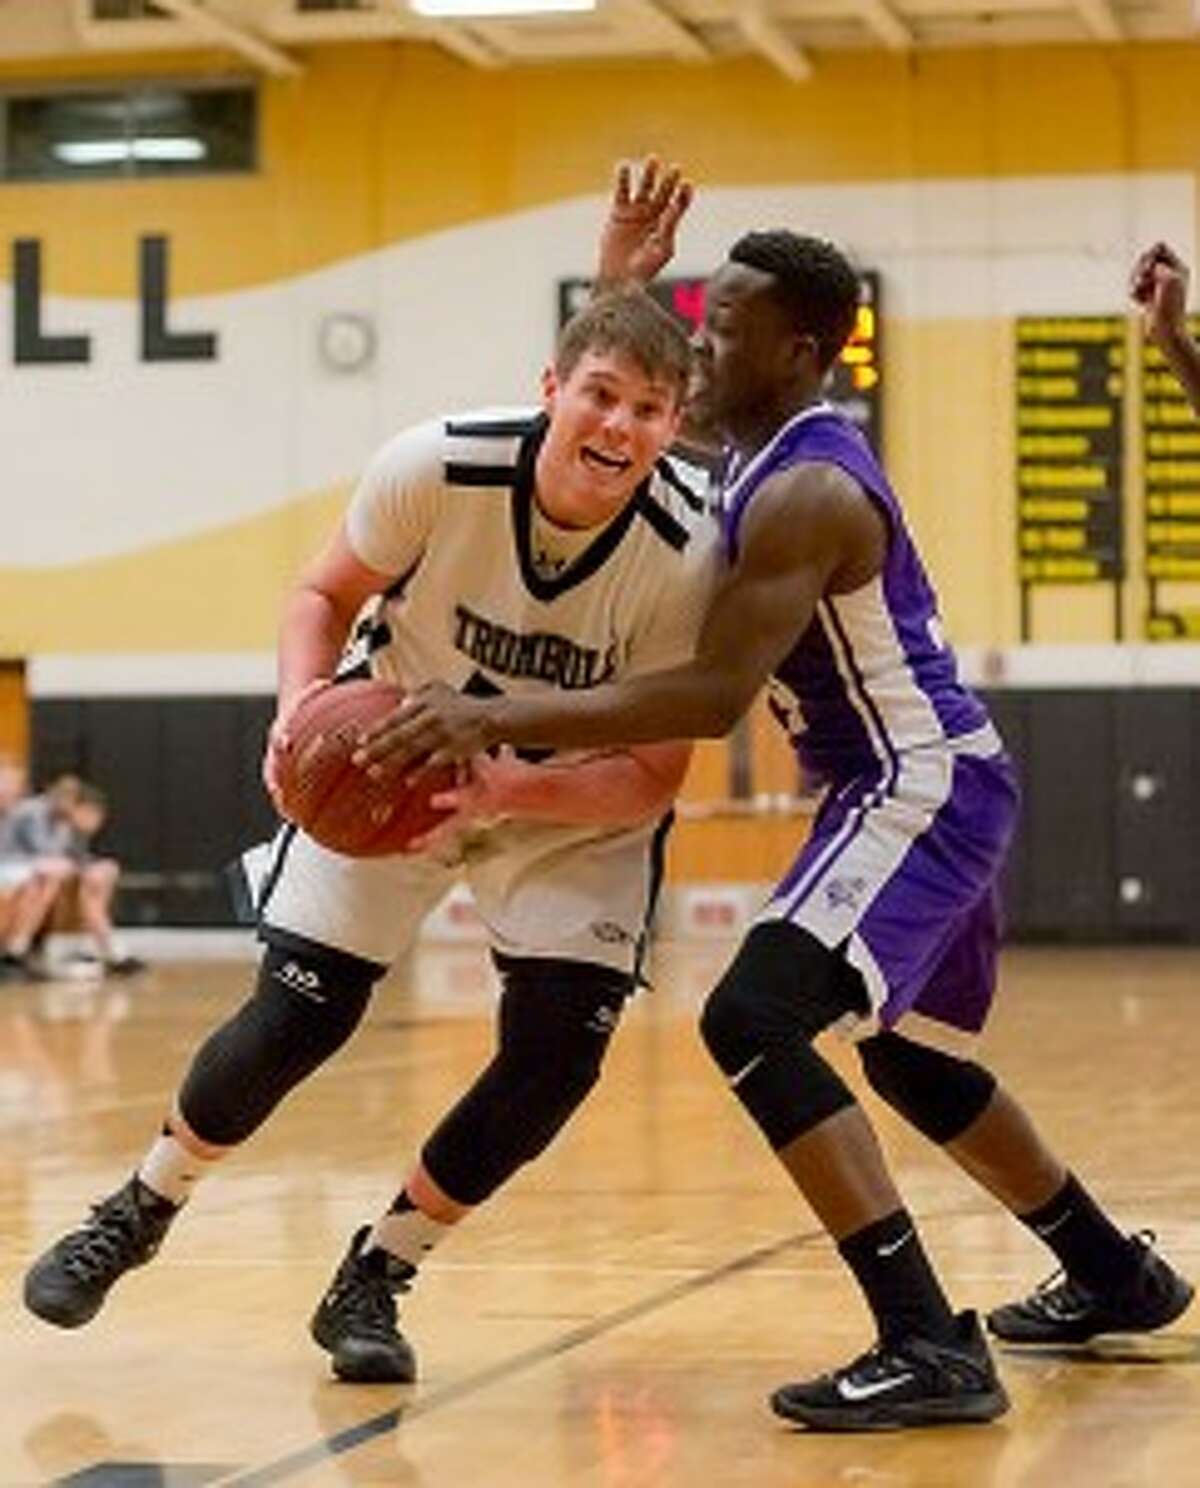 Trumbull's Ben McCullough looks to go up for a shot against the Westhill Vikings. — David G. Whitham photo